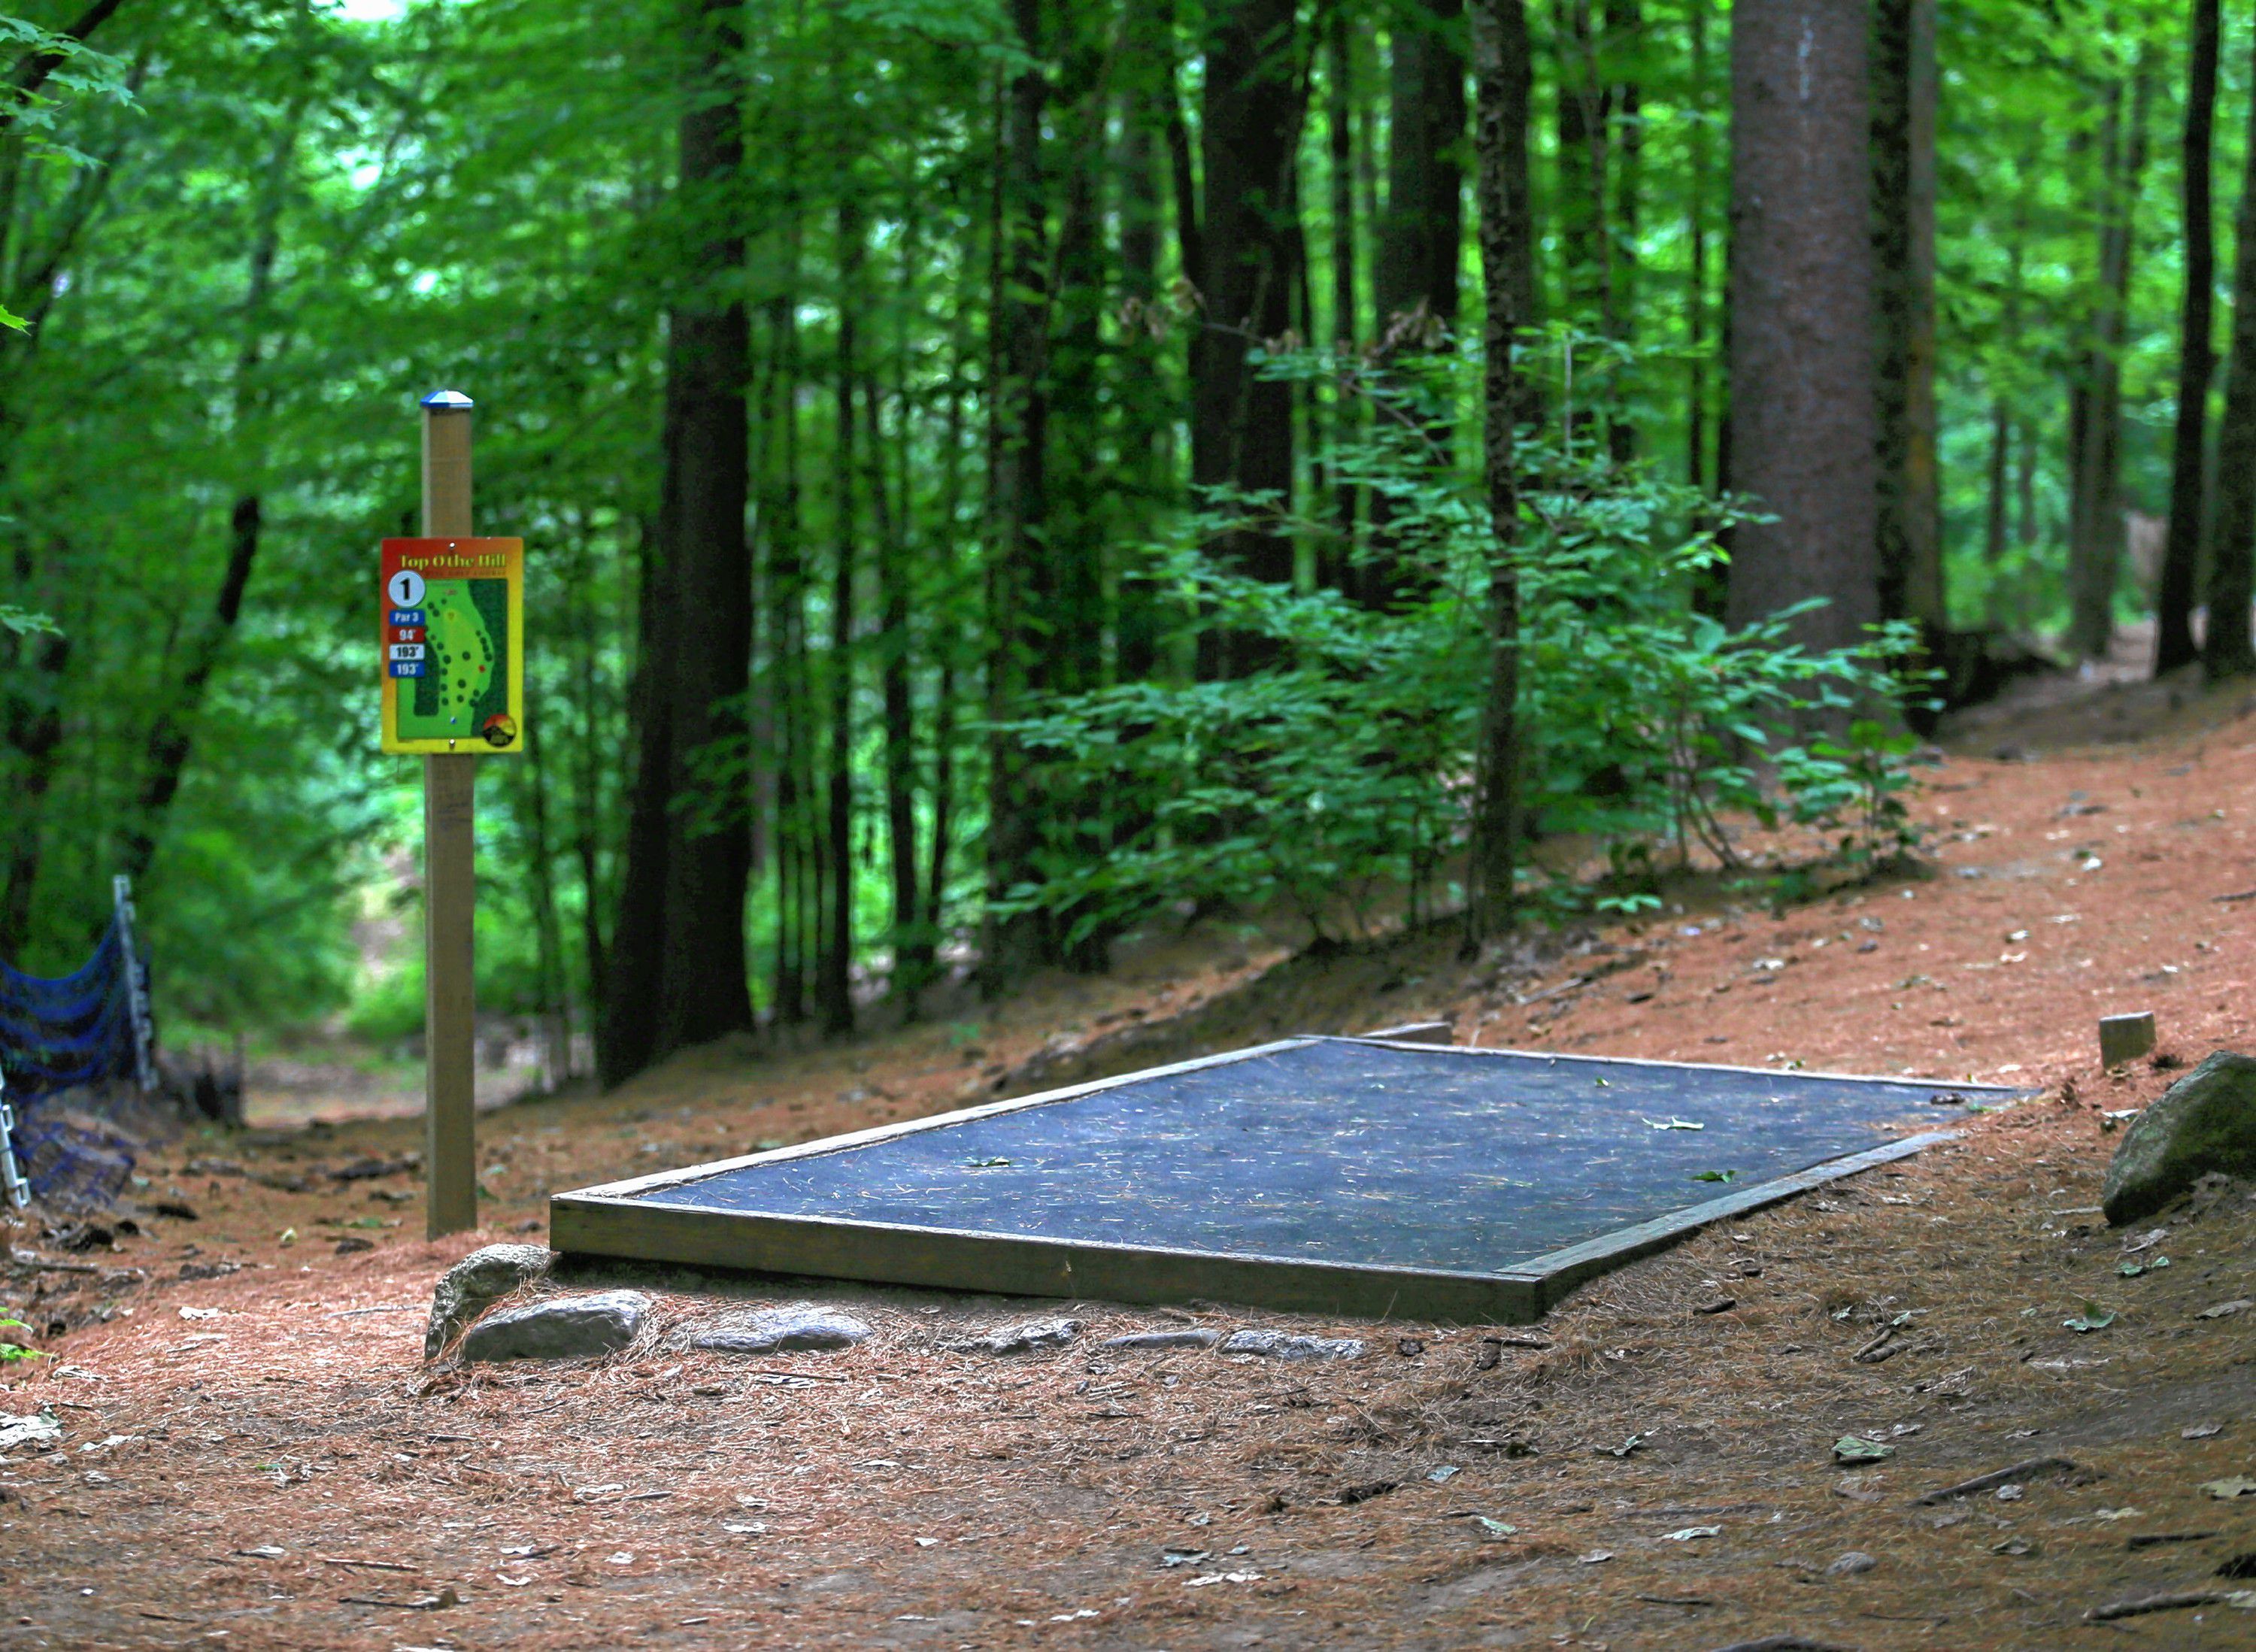 If you make your way through the woods at Top O’The Hill Disc Golf Course in Canterbury, you’ll quickly come across the first tee box.